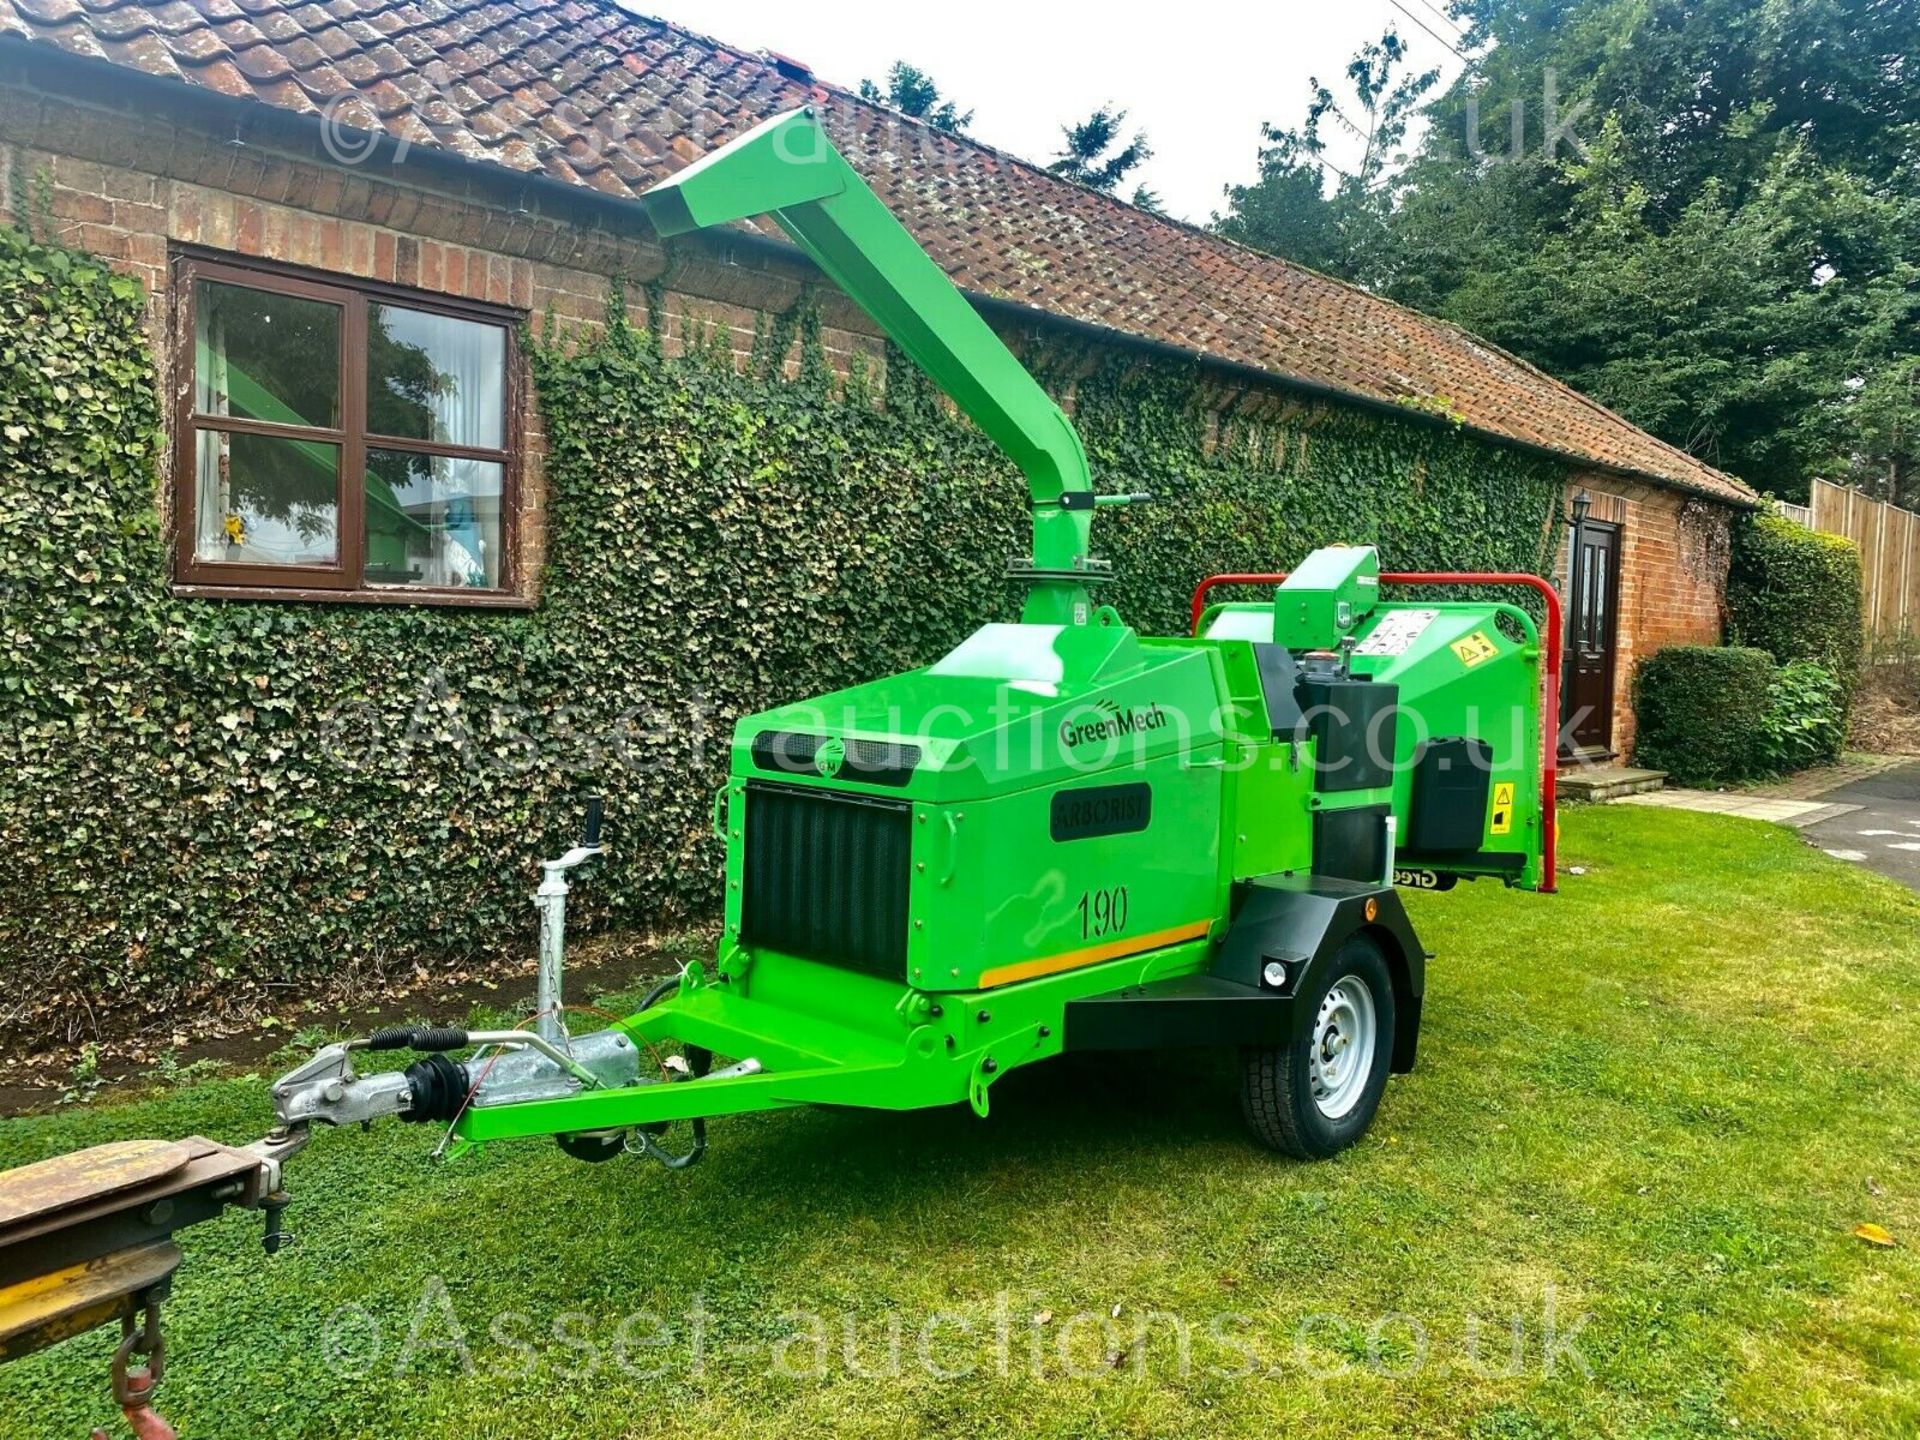 GREENMECH WOODCHIPPER, YEAR 2015, 190MM CHIPPING CAPACITY, ARBORIST 190, ONLY 275 HOURS *PLUS VAT* - Image 2 of 8